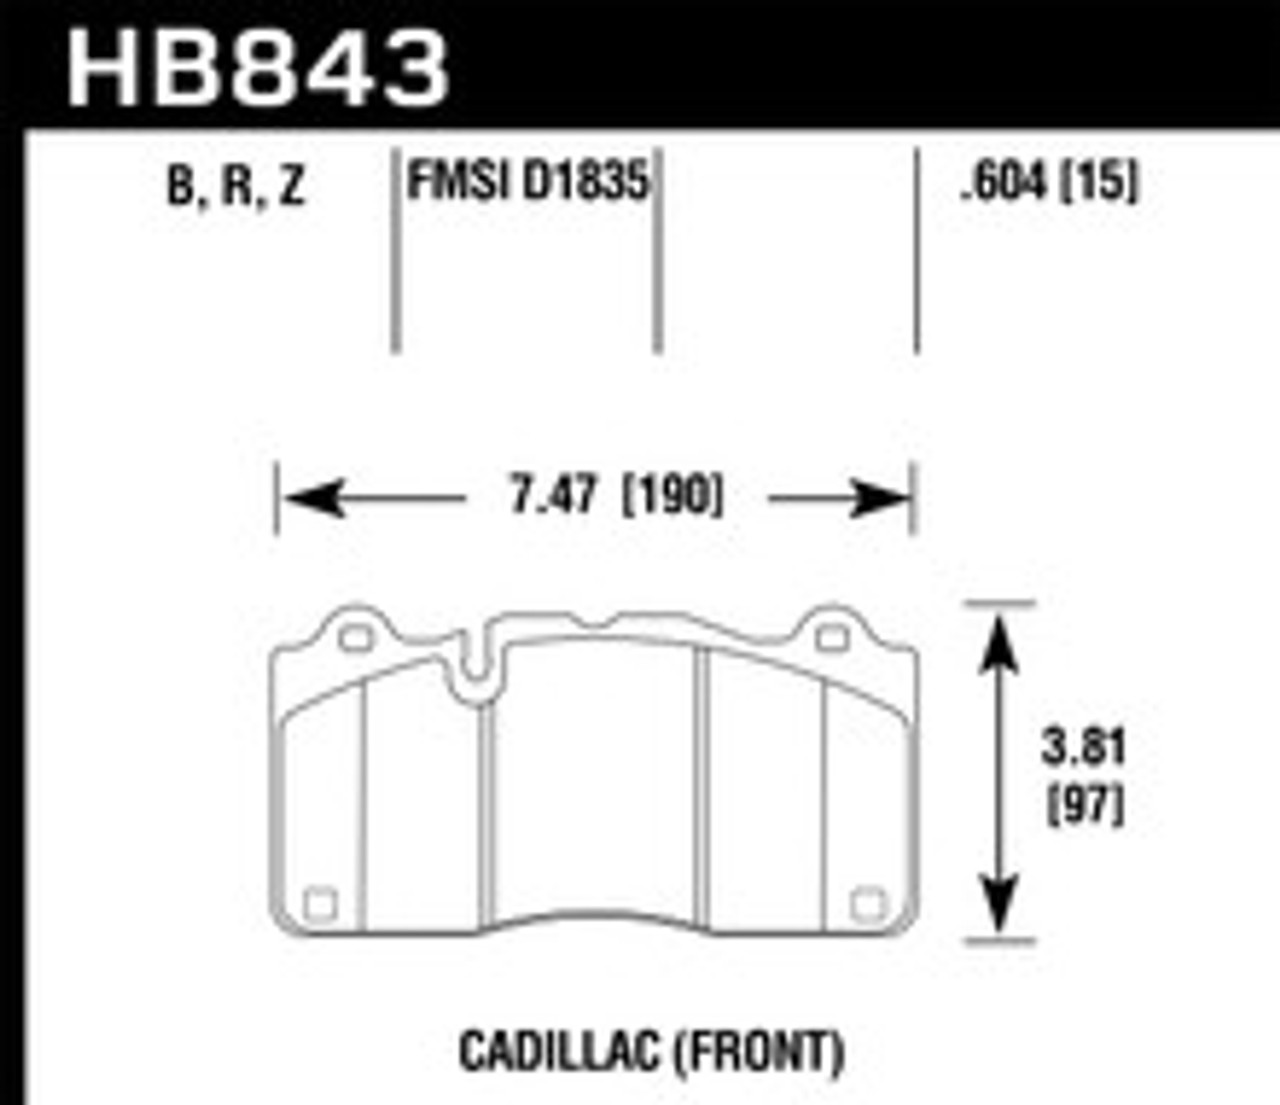 Hawk 2016 Cadillac CTS DTC-60 Race Front Brake Pads - HB843G.604